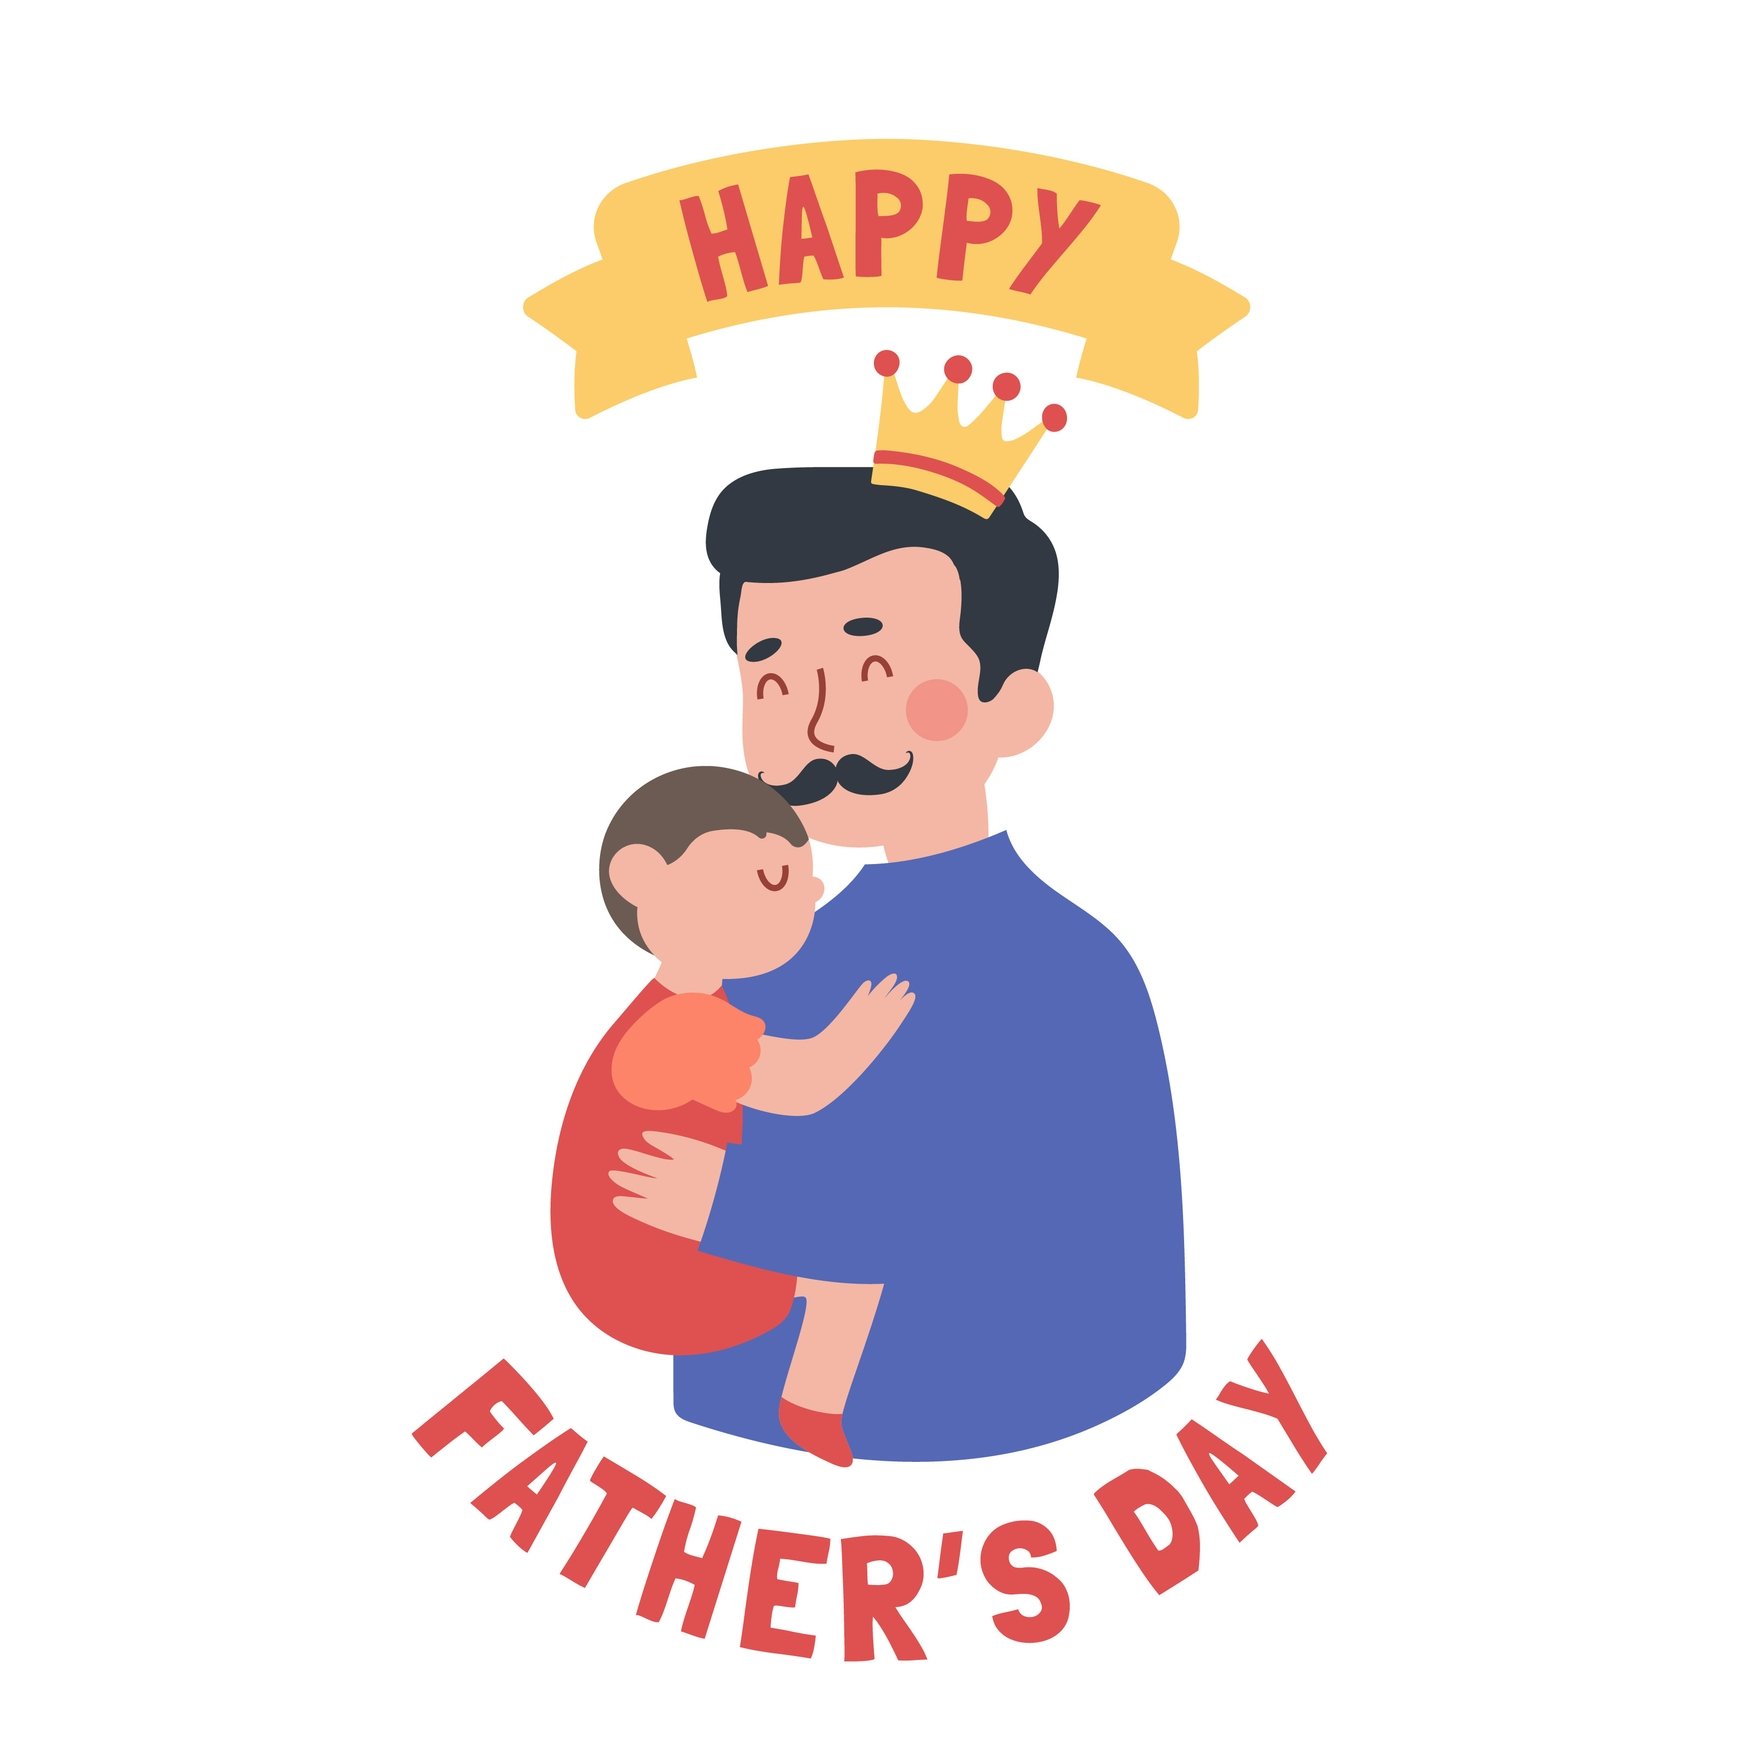 Happy Father's Day Gif in Illustrator, EPS, SVG, JPG, GIF, PNG, After Effects